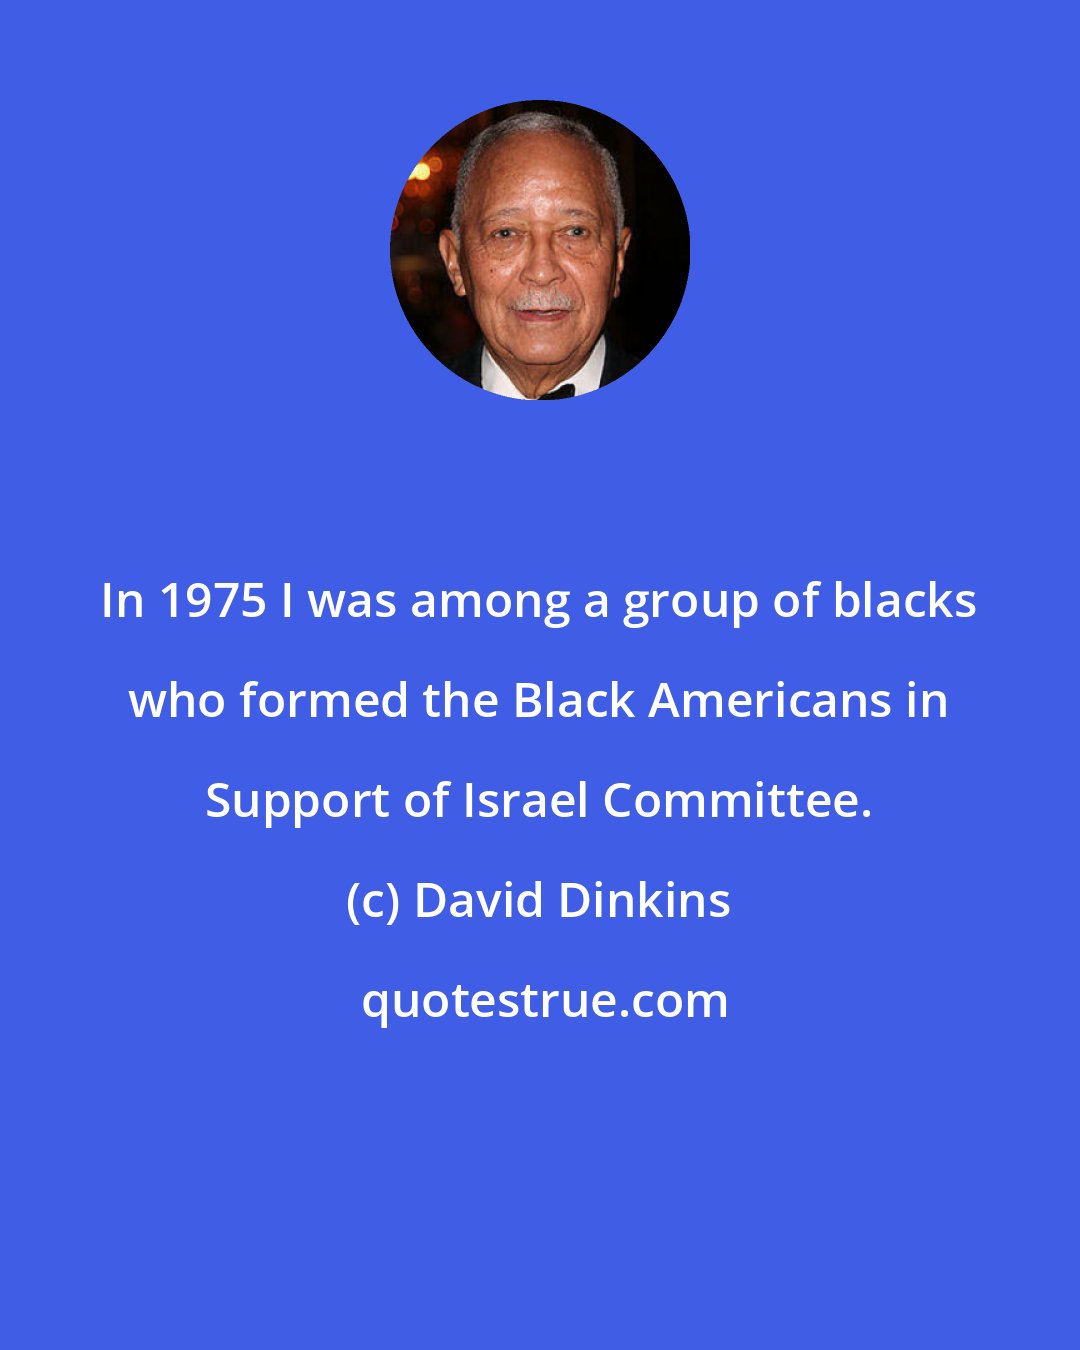 David Dinkins: In 1975 I was among a group of blacks who formed the Black Americans in Support of Israel Committee.